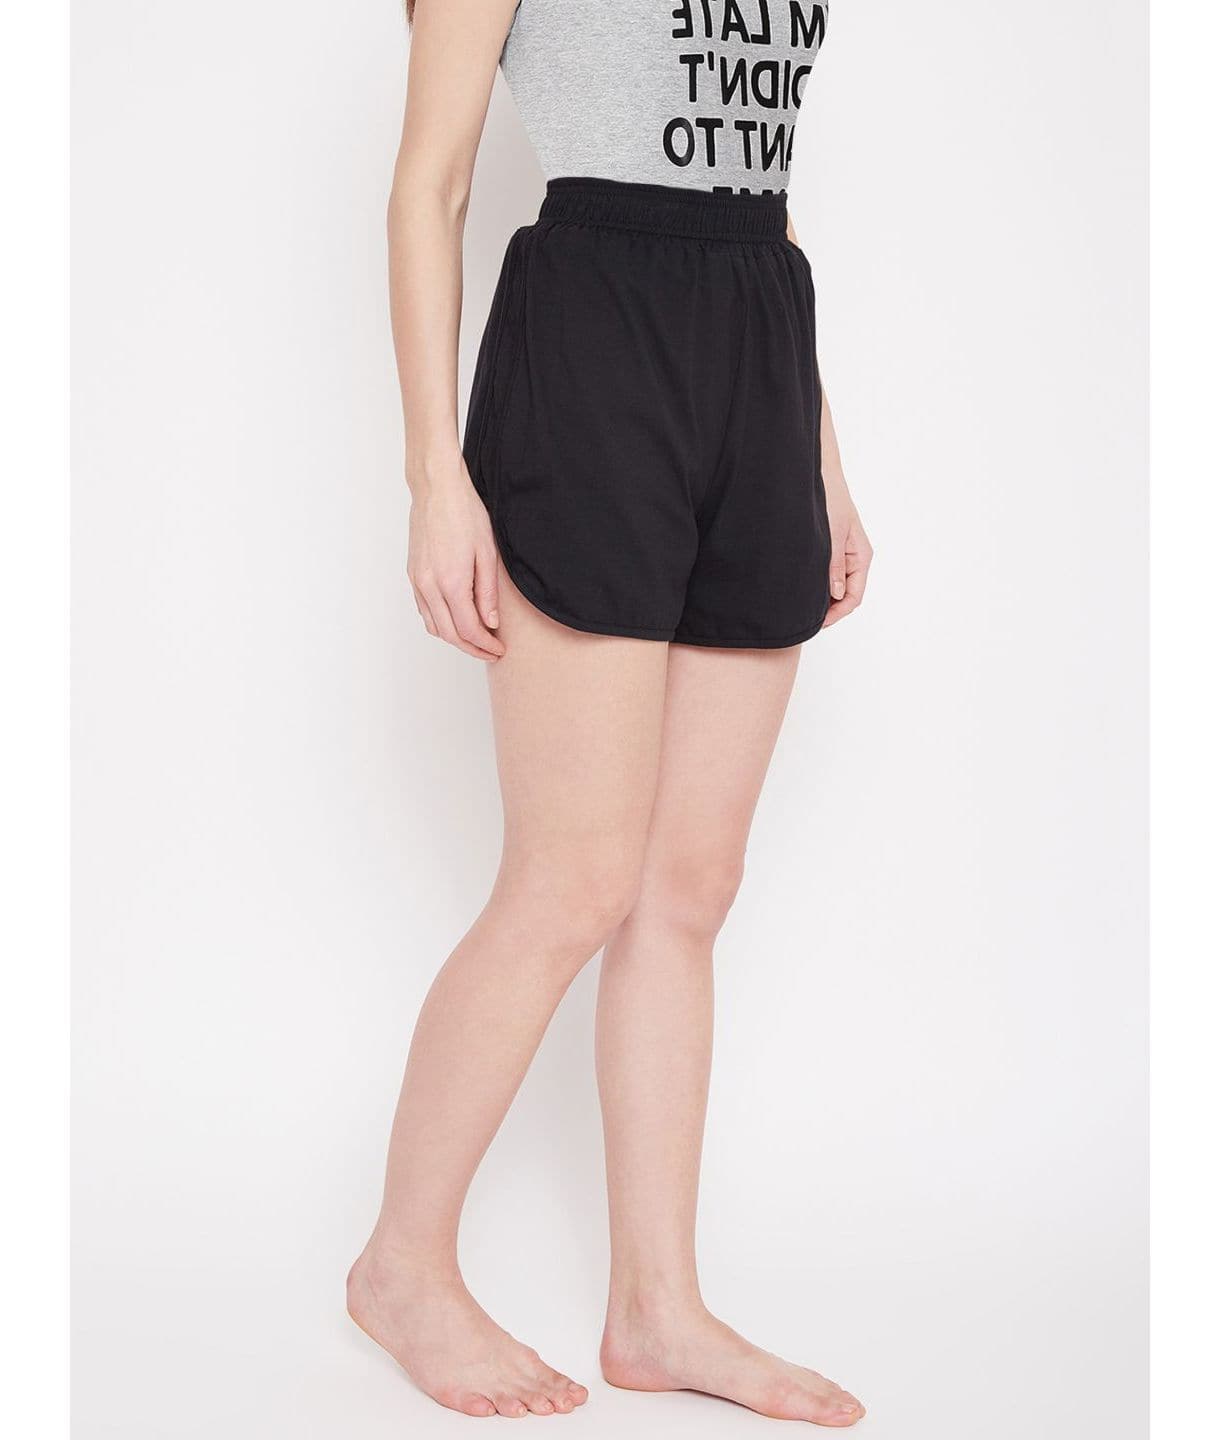 Cotton T-shirt and Shorts Set - Uptownie